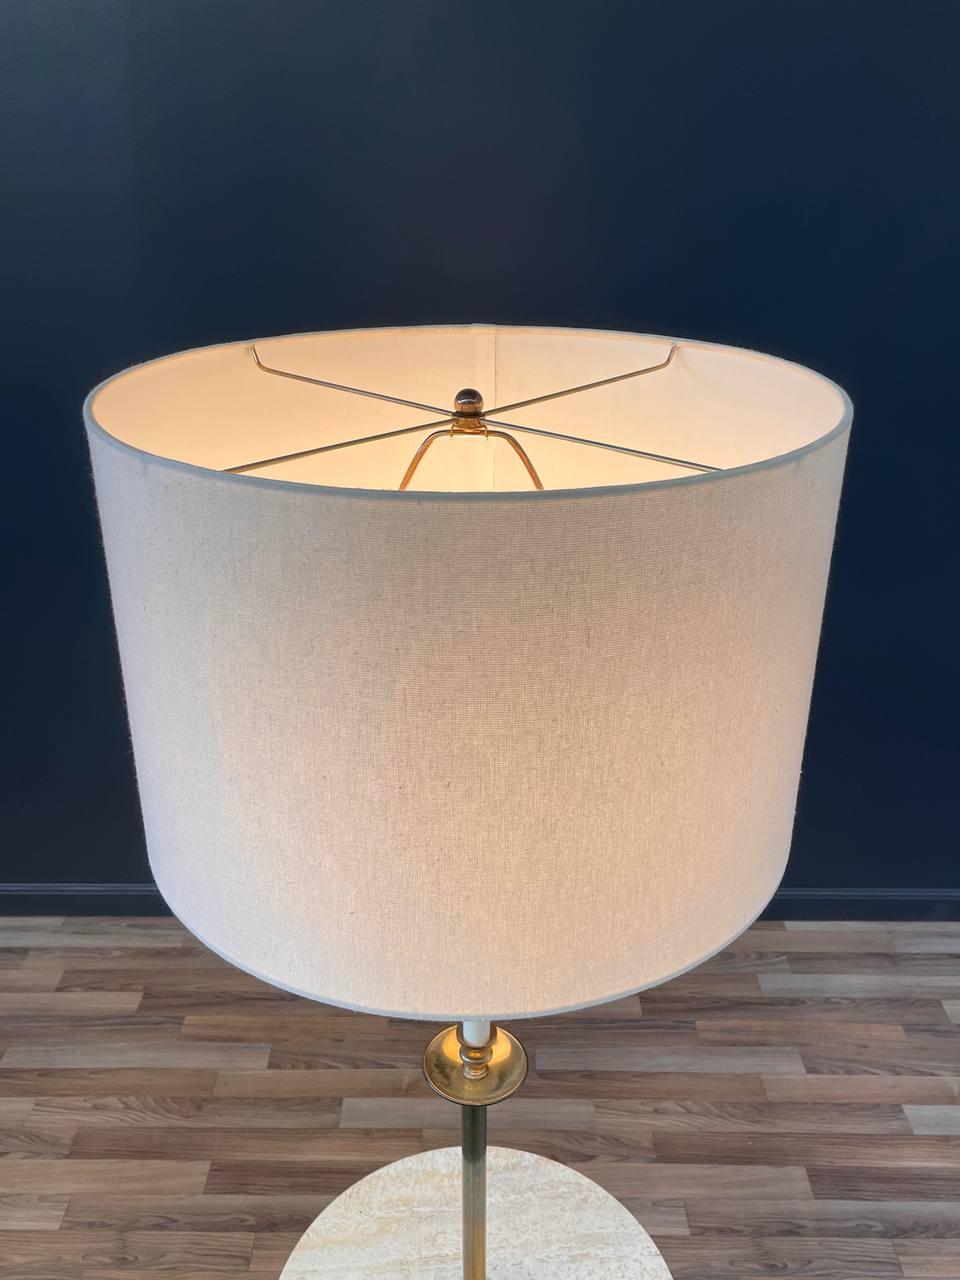 American Mid-Century Modern Floor Lamp with Travertine Side Table